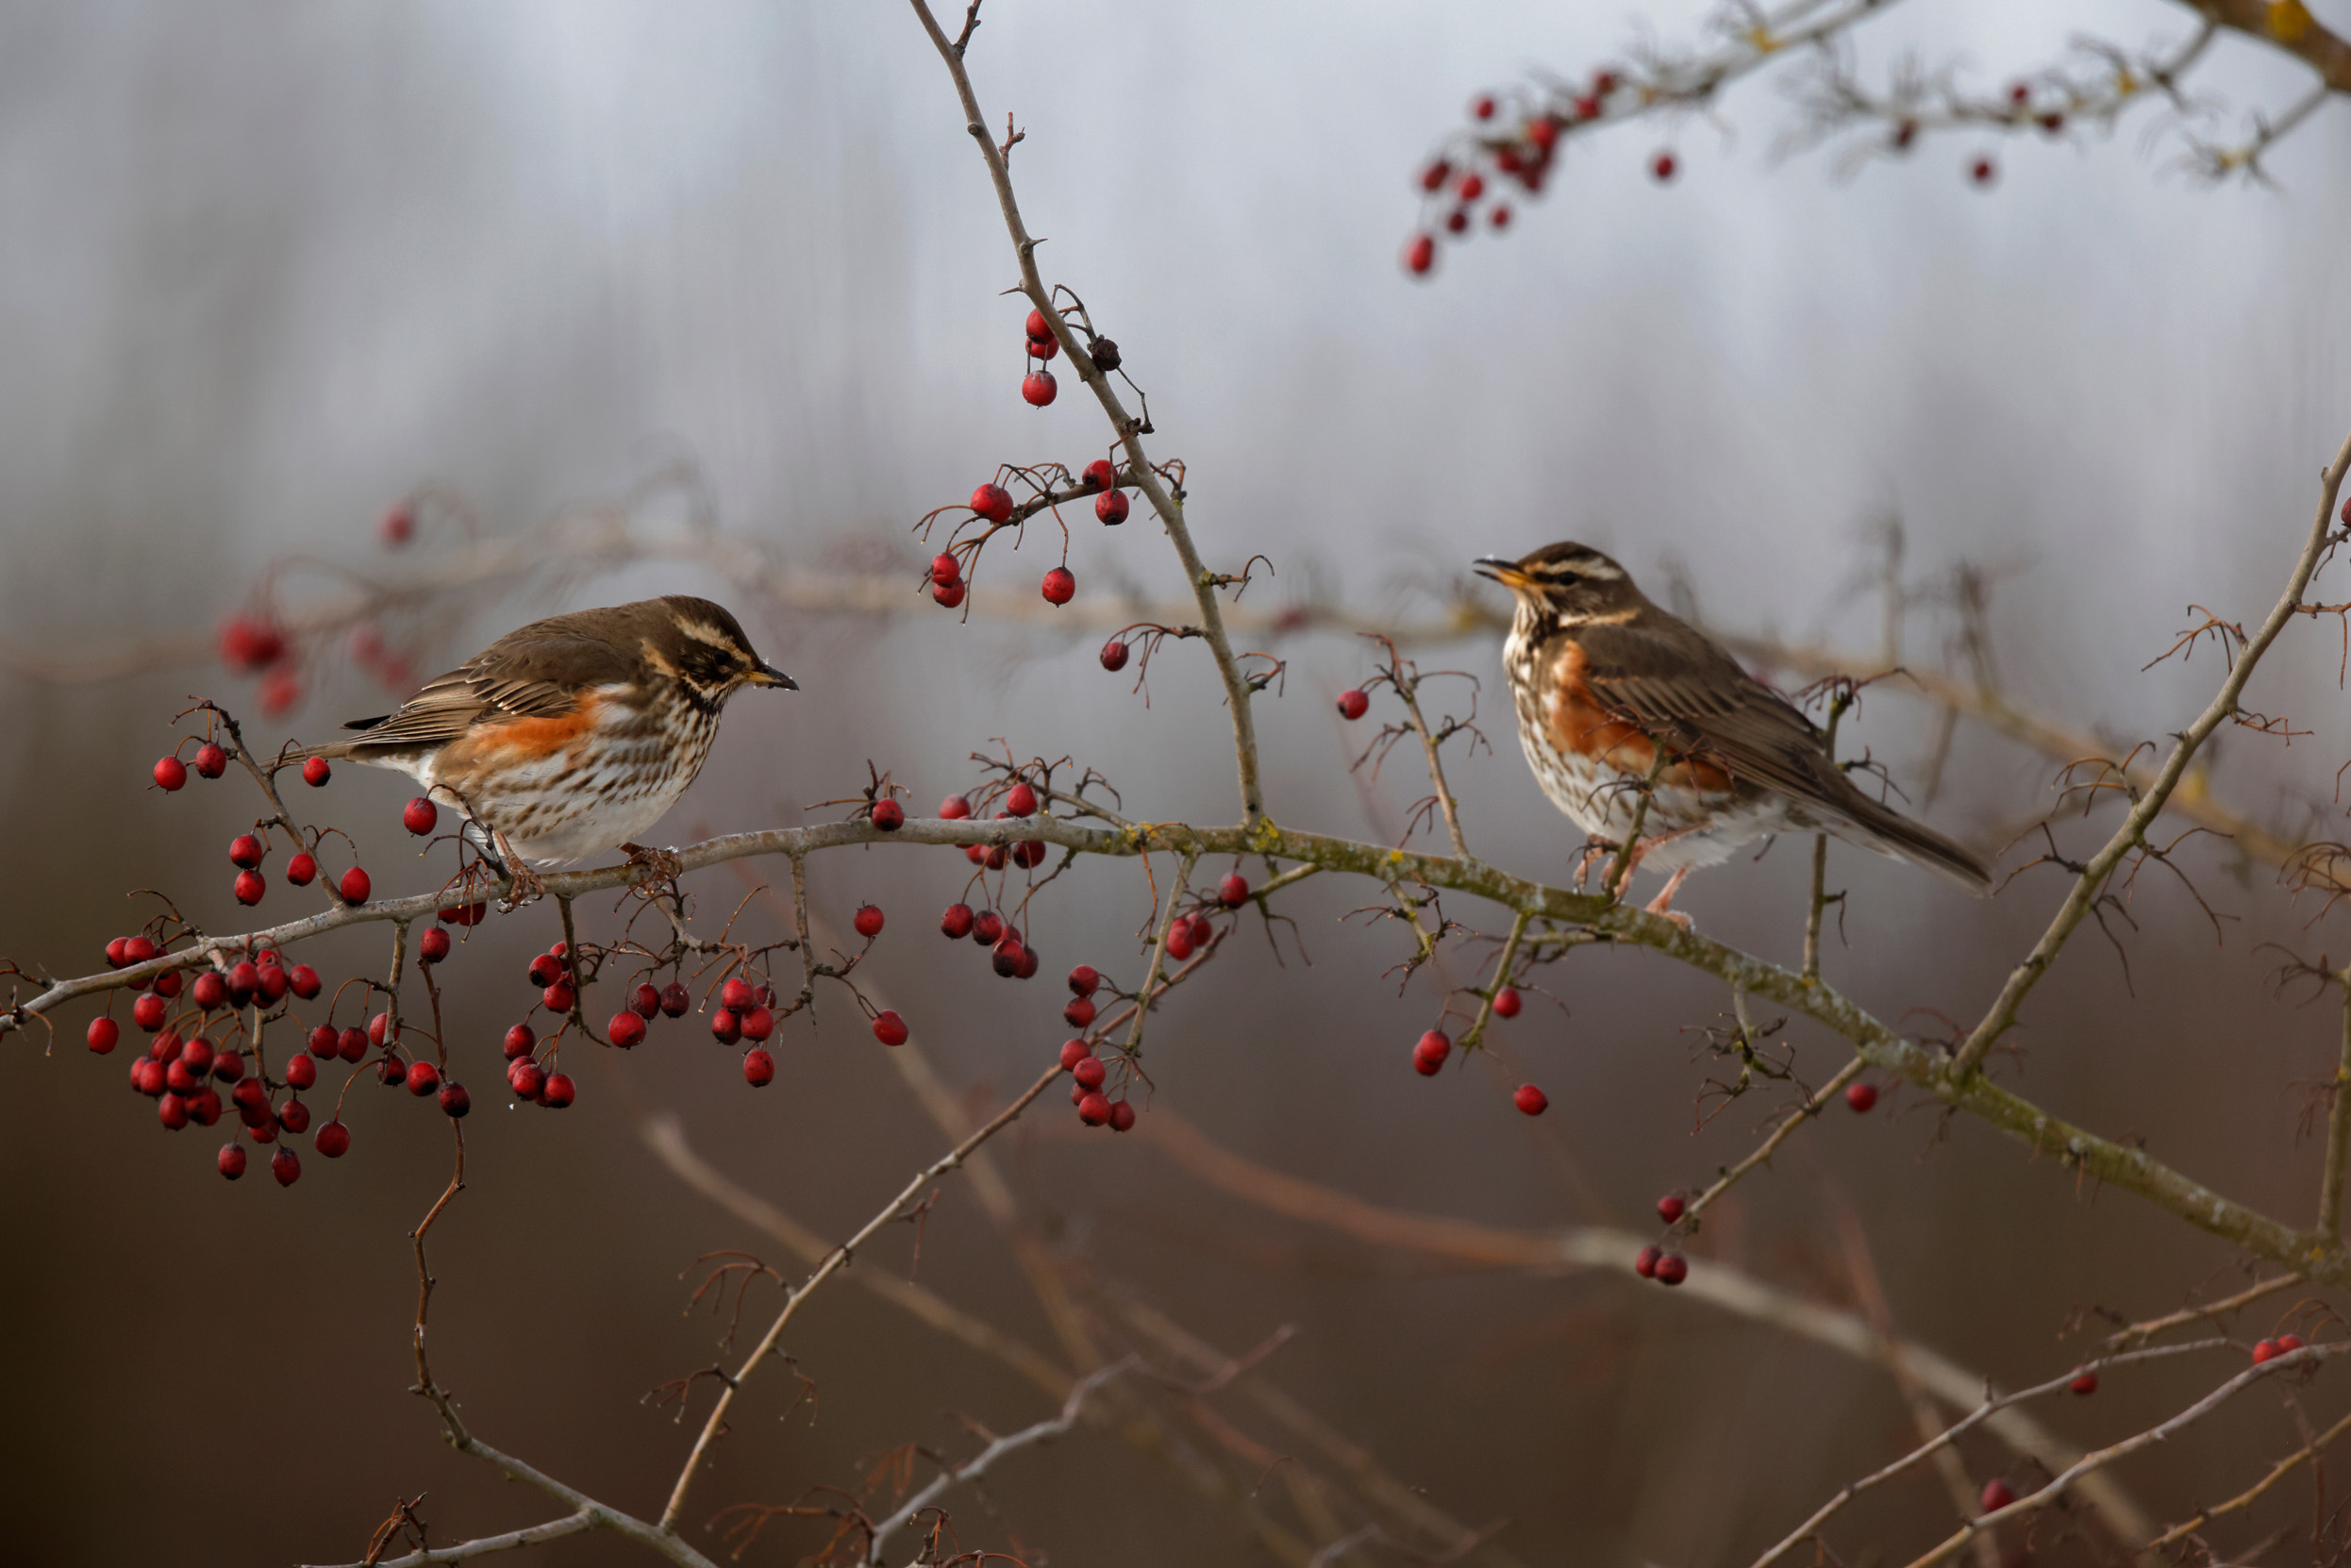 A pair of Redwings feeding on red berries in a tree.